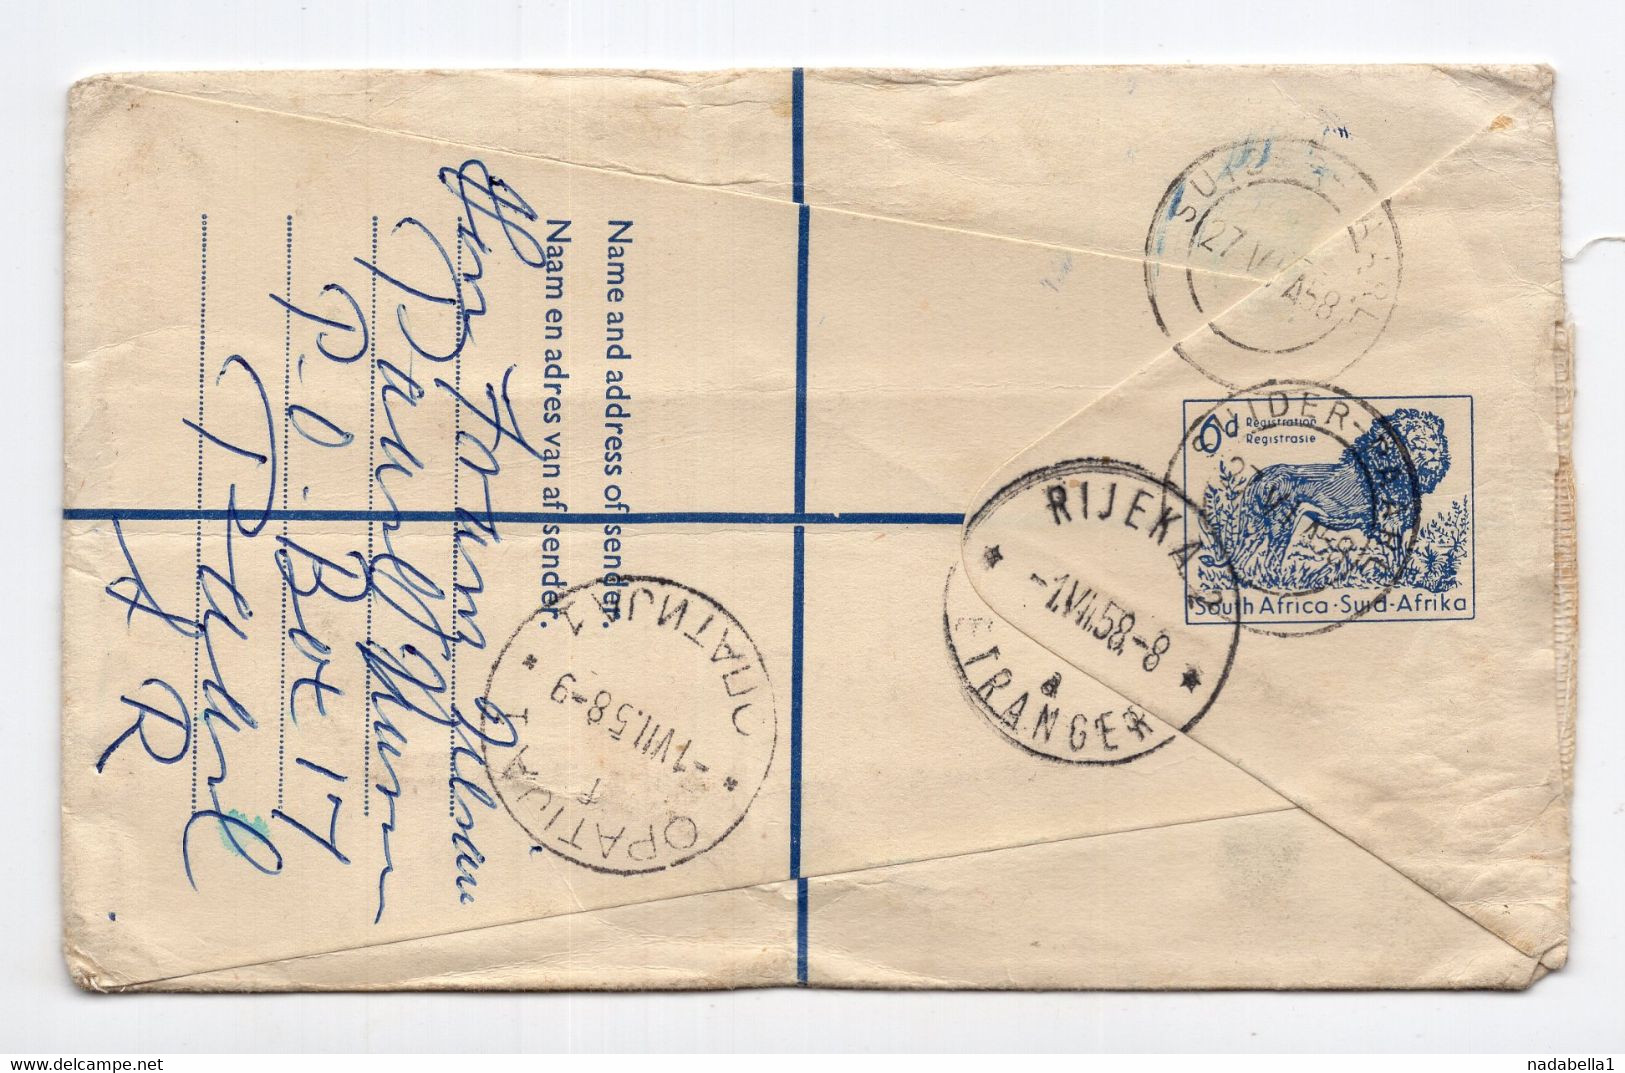 1958. SOUTH AFRICA,SUIDER-PAARL TO YUGOSLAVIA,REGISTERED AIRMAIL COVER TO OPATIJA,CROATIA - Airmail